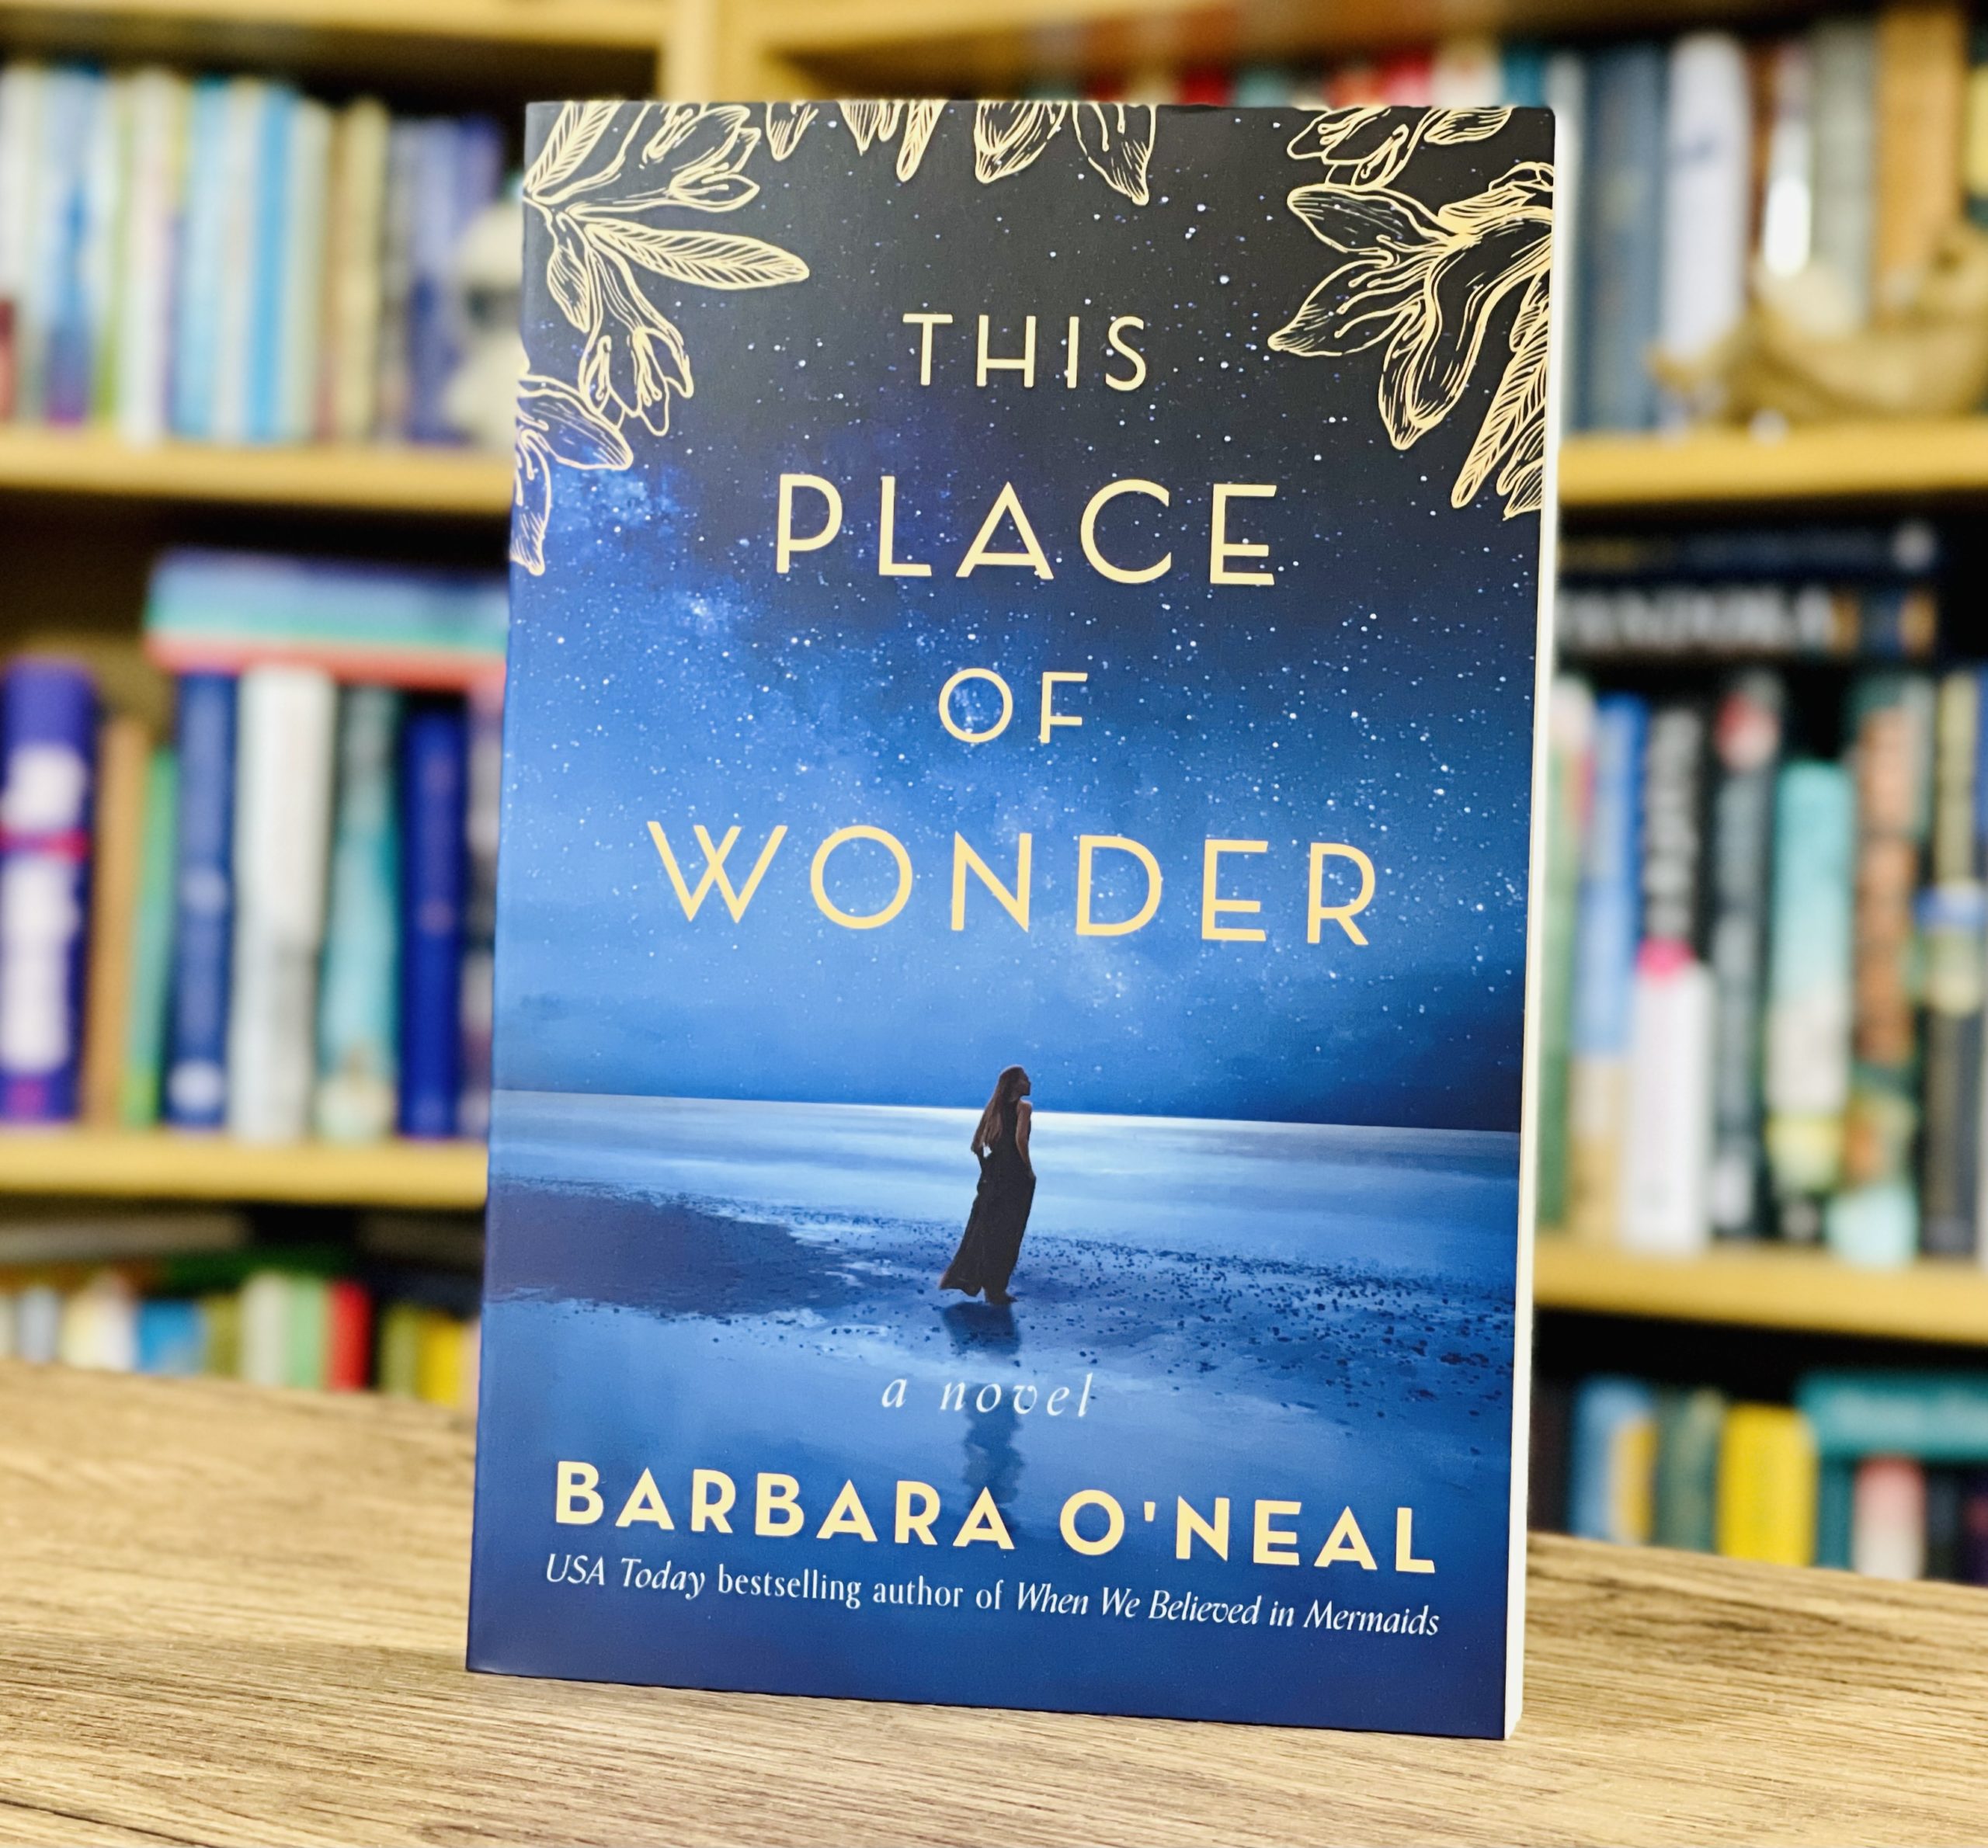 This Place of Wonder by Barbara O'Neal